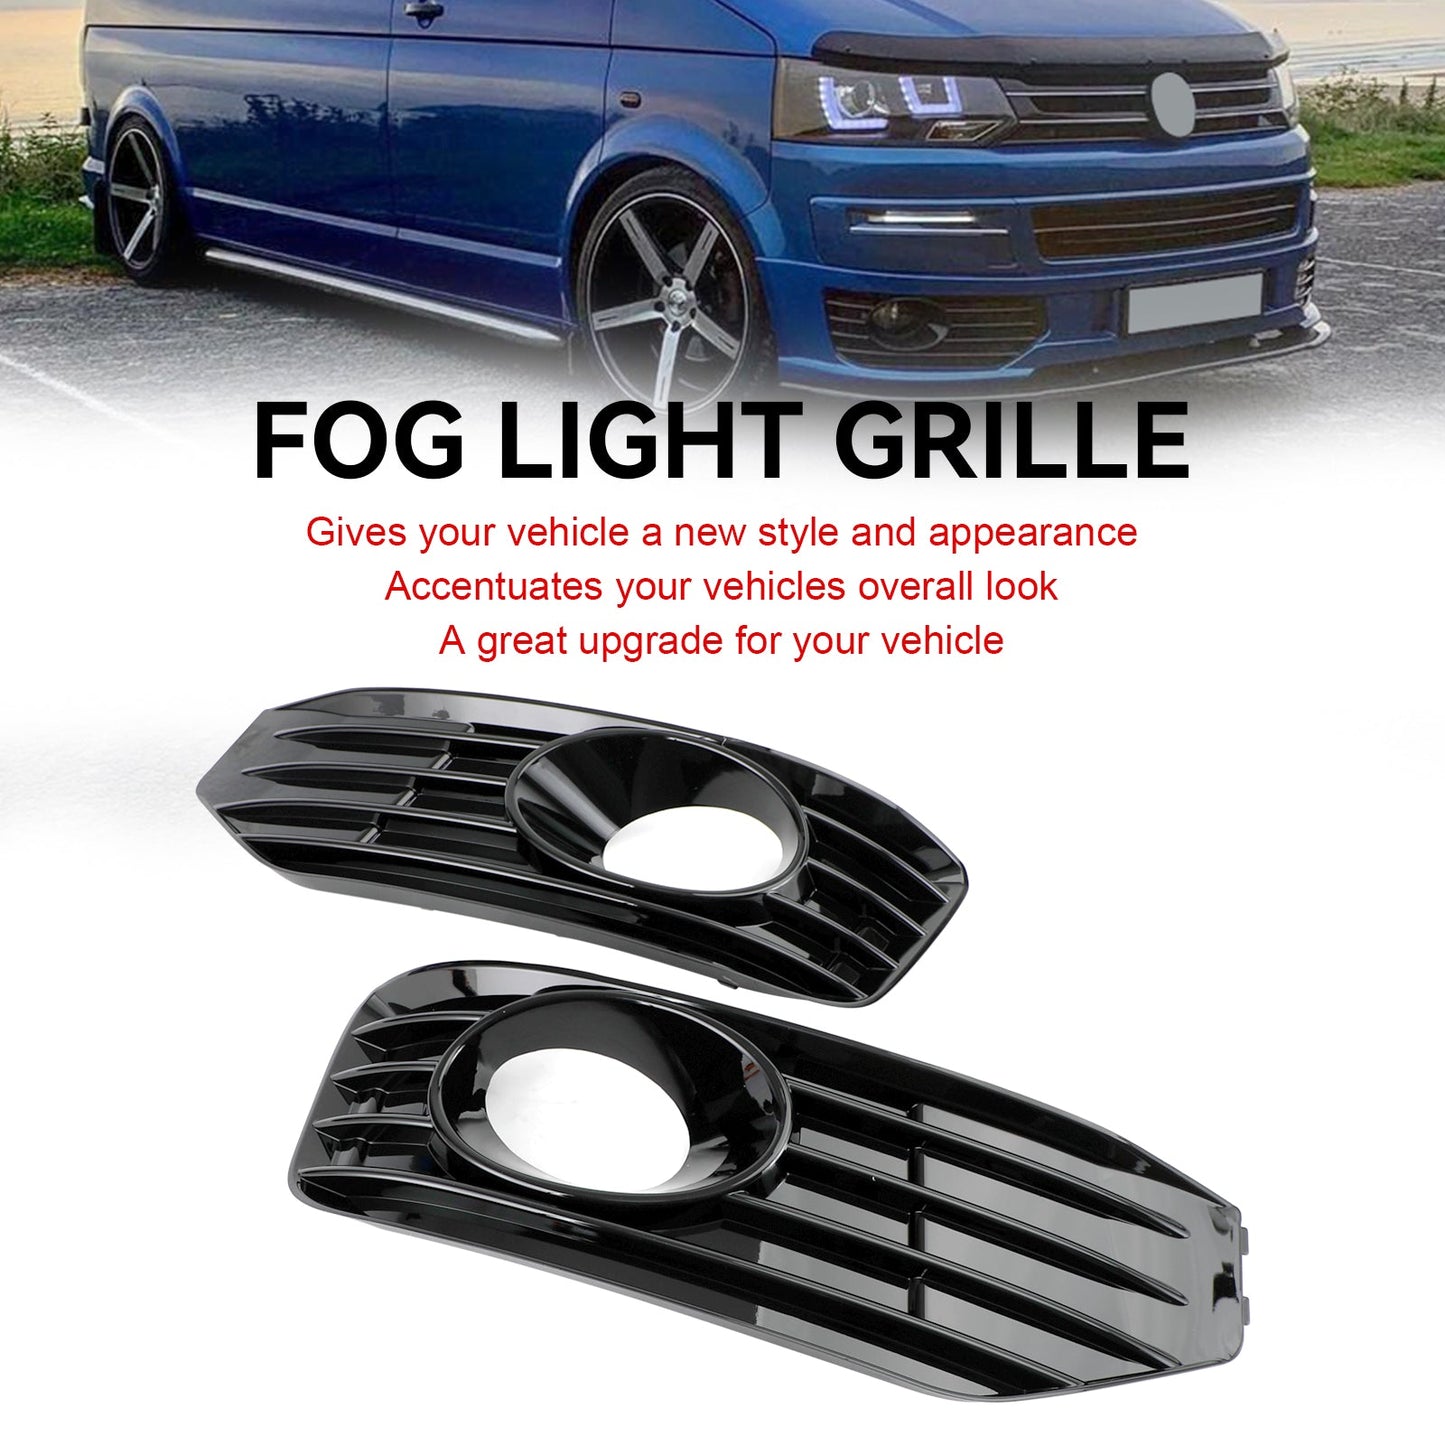 VW T5 T5.1 2010-2015 Gloss Black Fog Lamp Light Cover Insert S-line GrilleVehicle Parts &amp; Accessories, Car Parts, Interior Parts &amp; Furnishings!